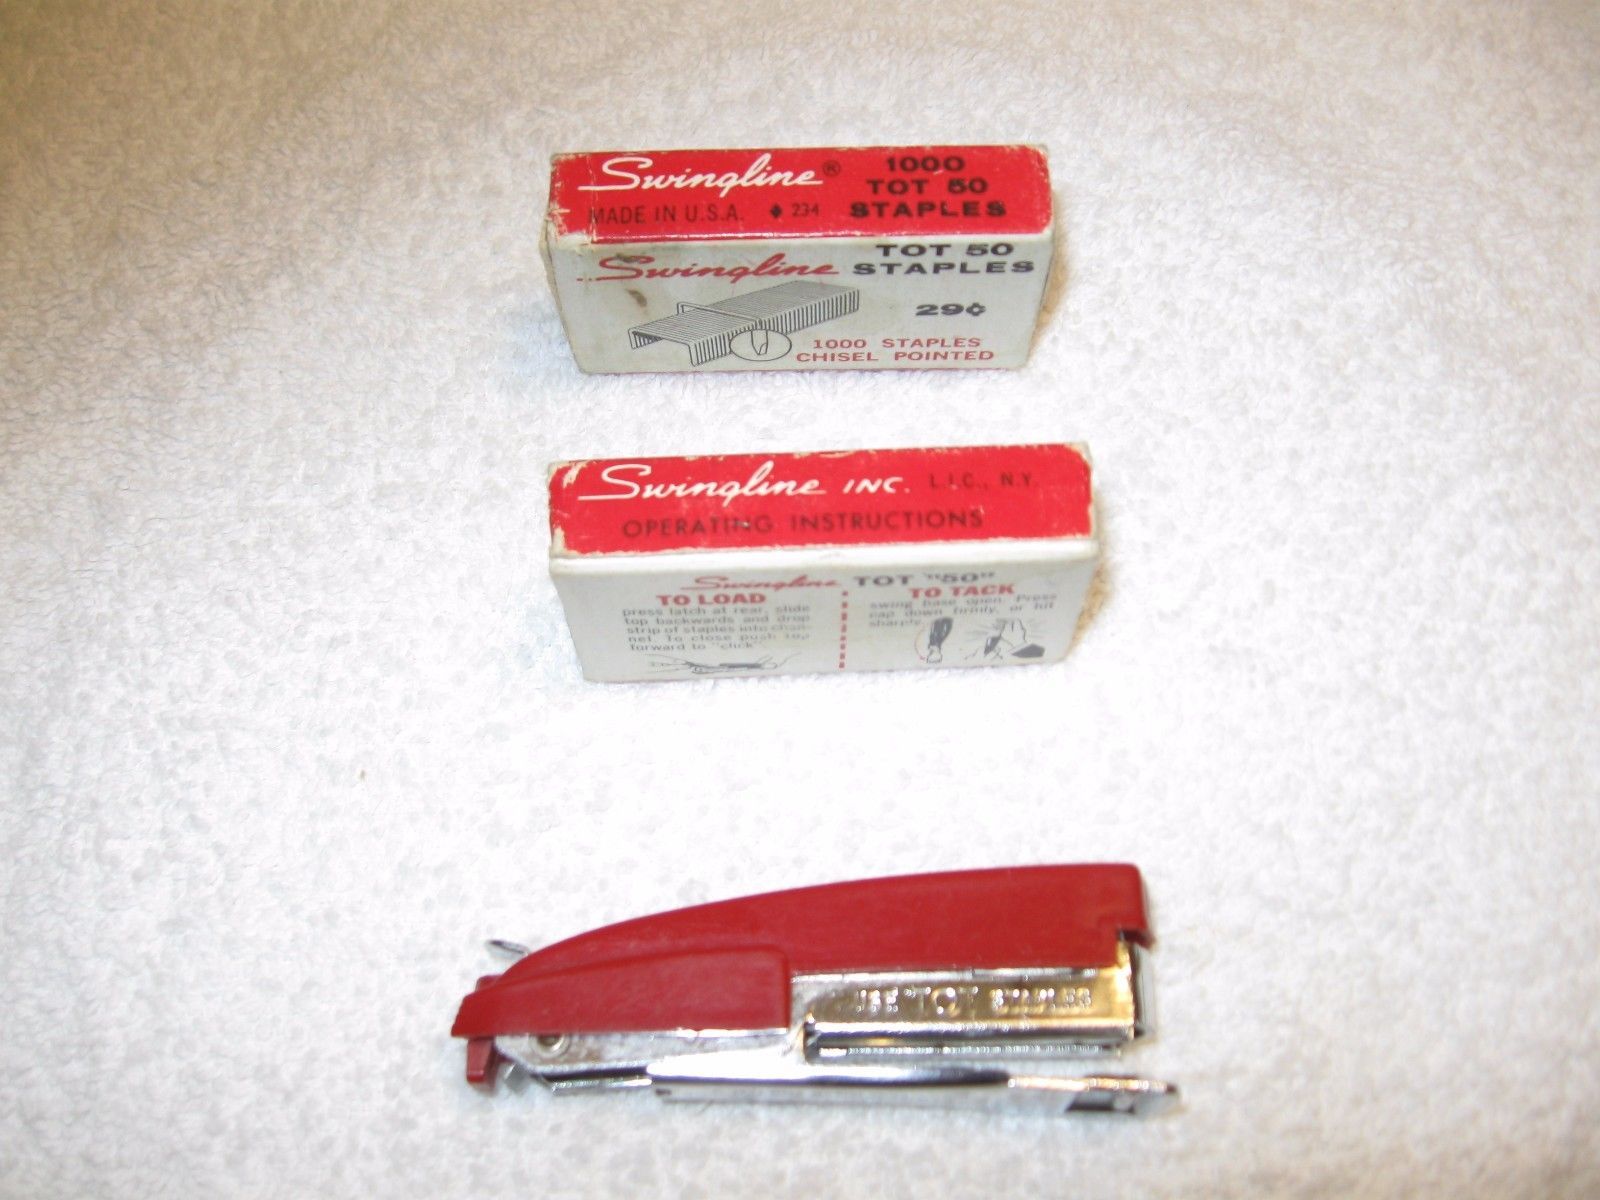 VTG Compact Size Swingline Red Tot 50 Stapler With Box Of  Staples 